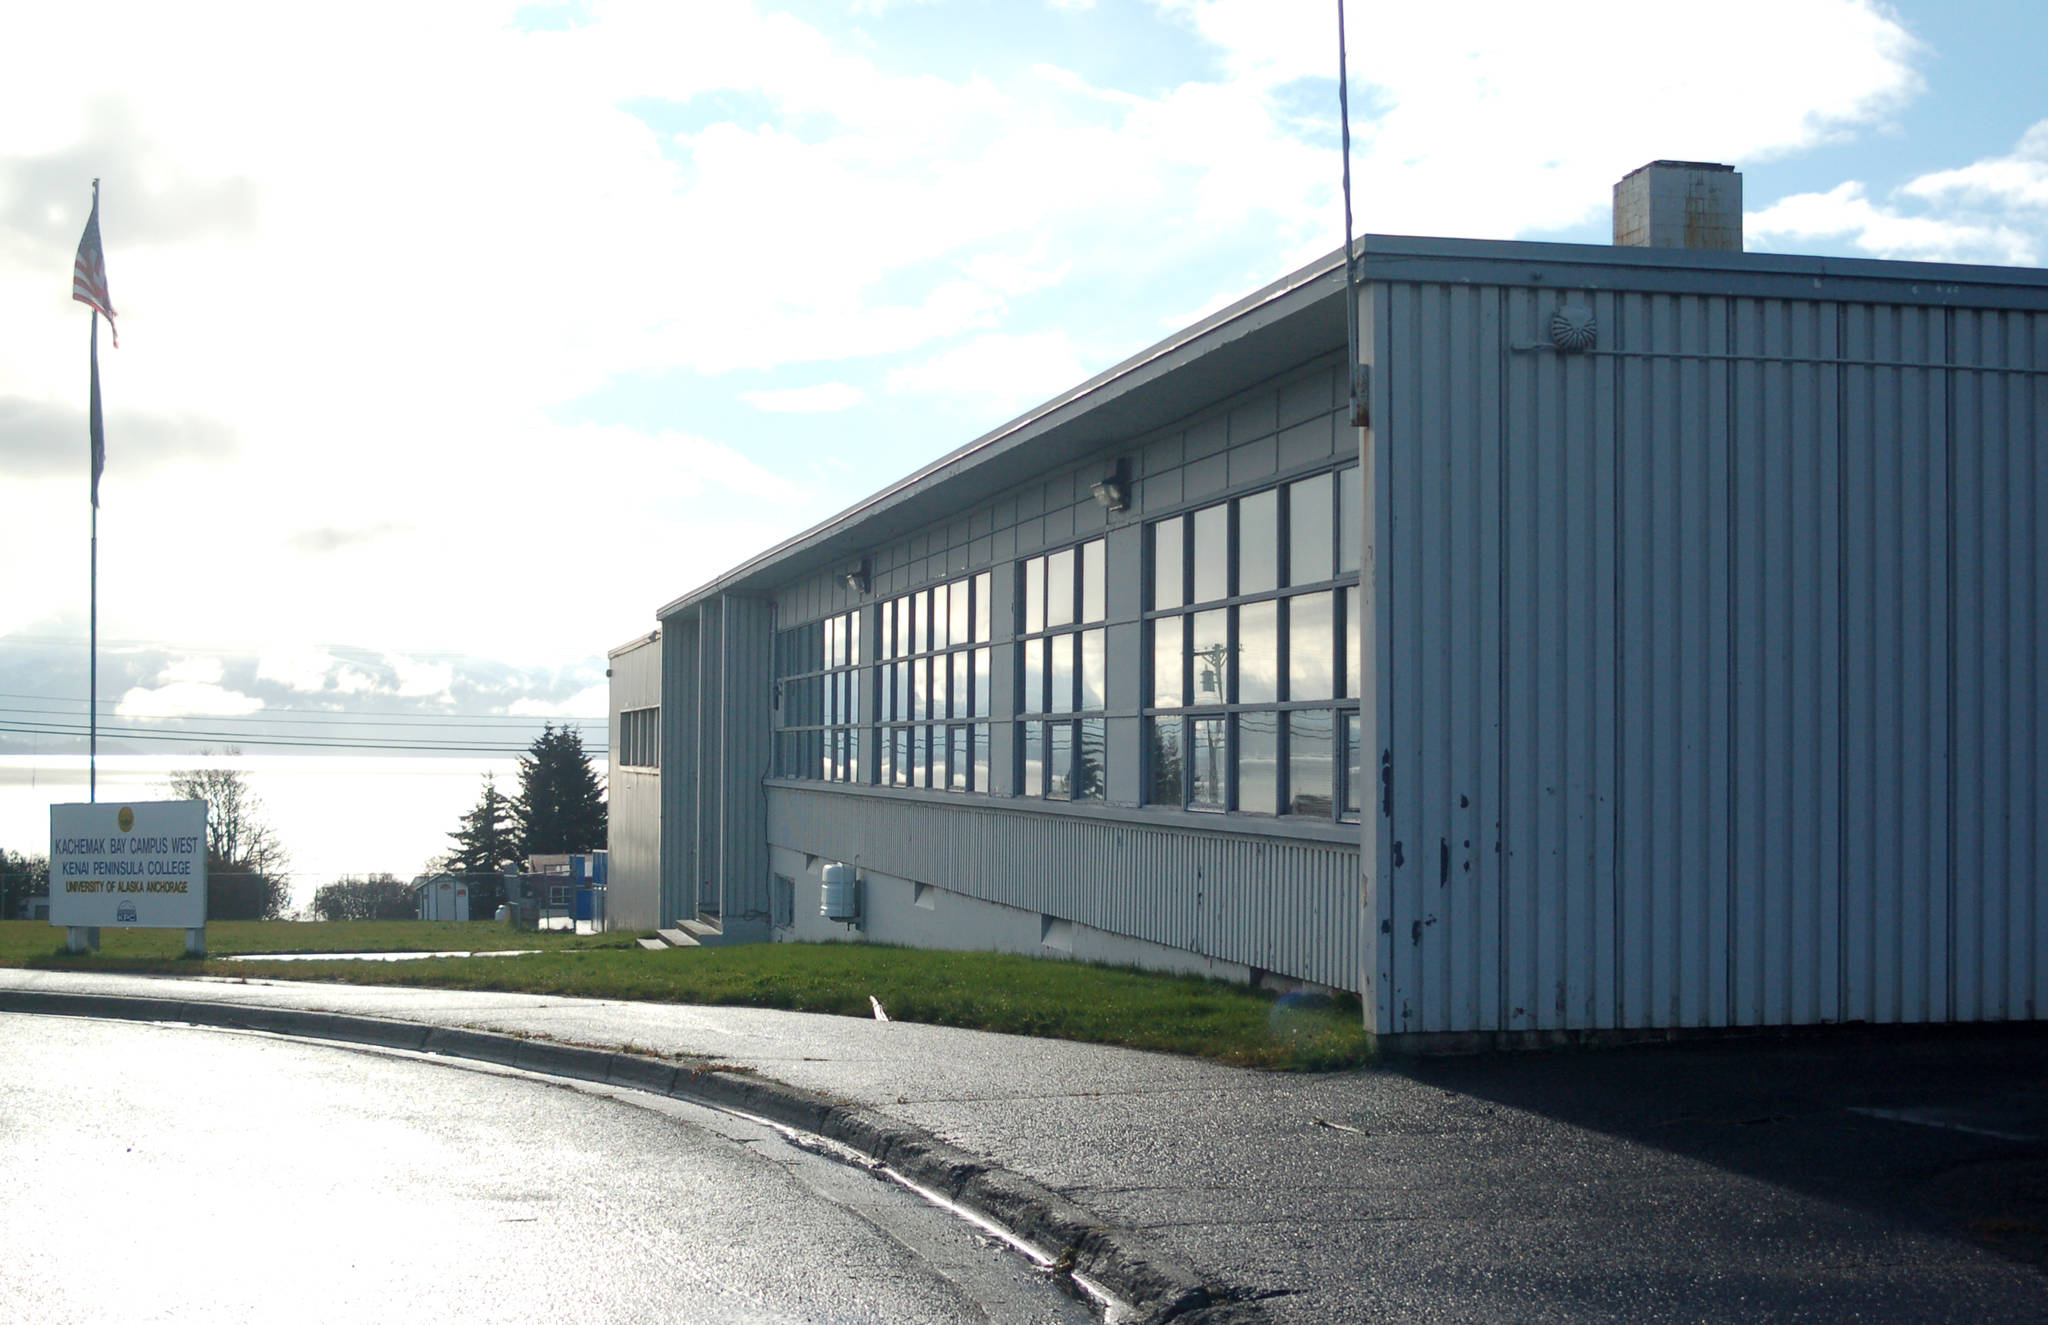 The HERC Building as seen in a 2010 file photo from the upper parking lot at Woodside Avenue. At the time the Kachemak Bay Campus used the building as temporary office and classroom space while the Pioneer Avenue building was being remodeled, one of several uses of the HERC since the city acquired it from the Kenai Peninsula Borough in 2000. (Homer News file photo)                                The HERC Building as seen in a 2010 file photo from the upper parking lot at Woodside Avenue. At the time the Kachemak Bay Campus used the building as temporary office and classroom space while the Pioneer Avenue building was being remodeled, one of several uses of the HERC since the city acquired it from the Kenai Peninsula Borough in 2000. (Homer News file photo)